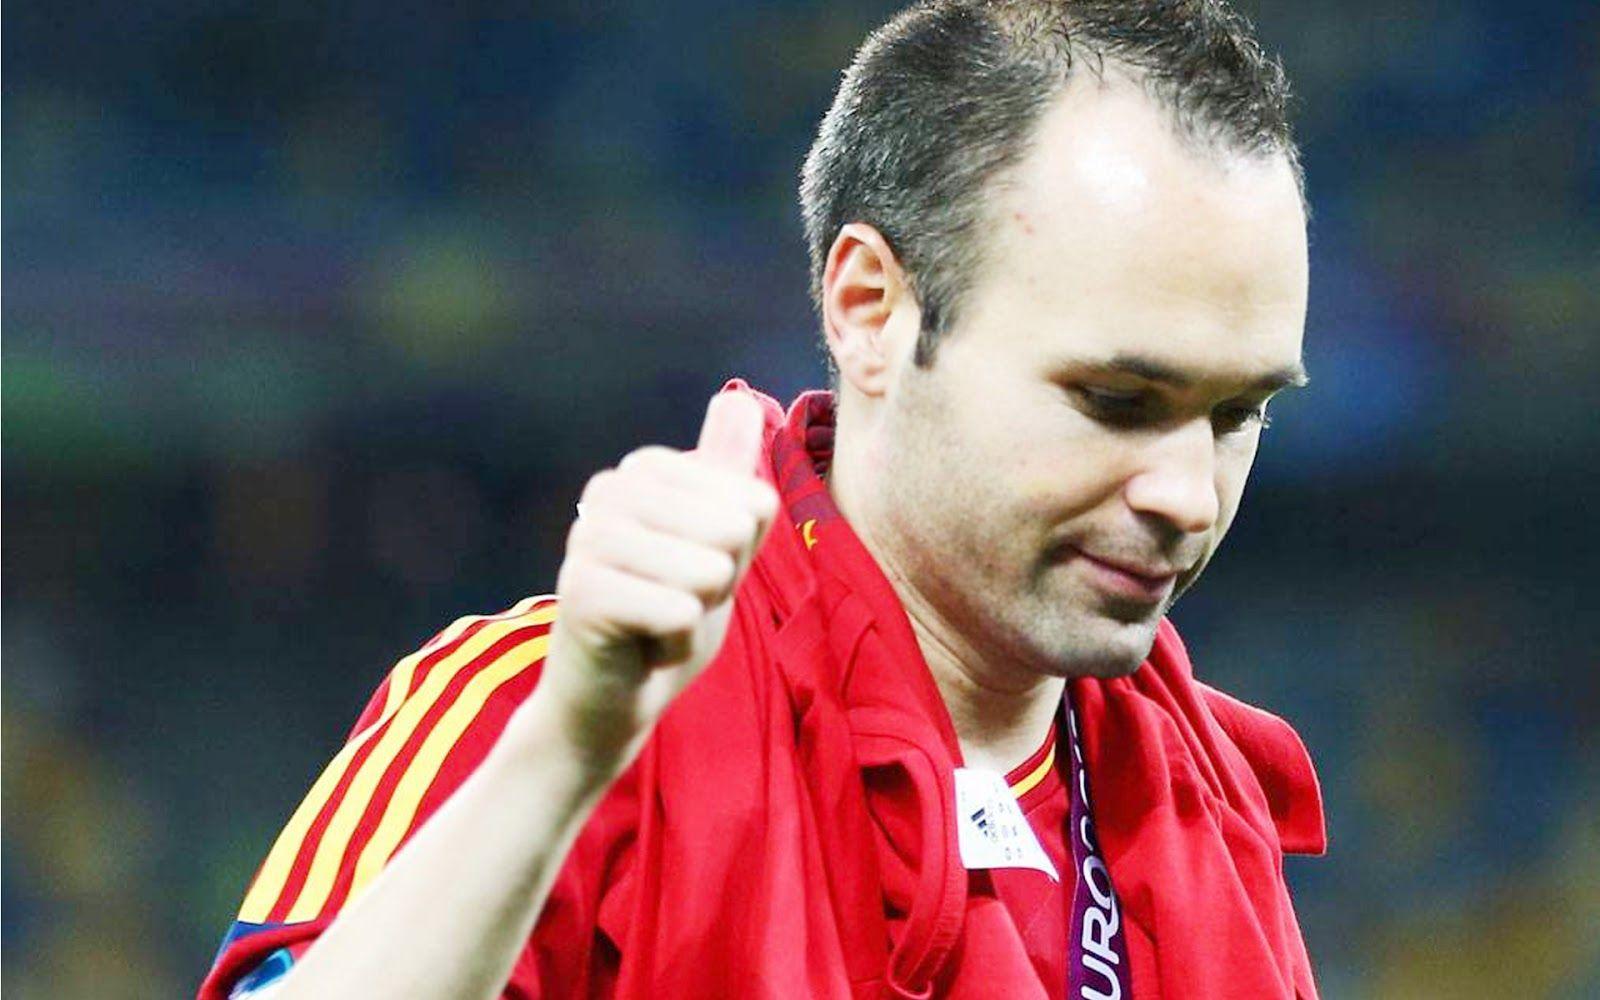 Top 61 Andres Iniesta Image,Pictures And HD Wallpapers Free